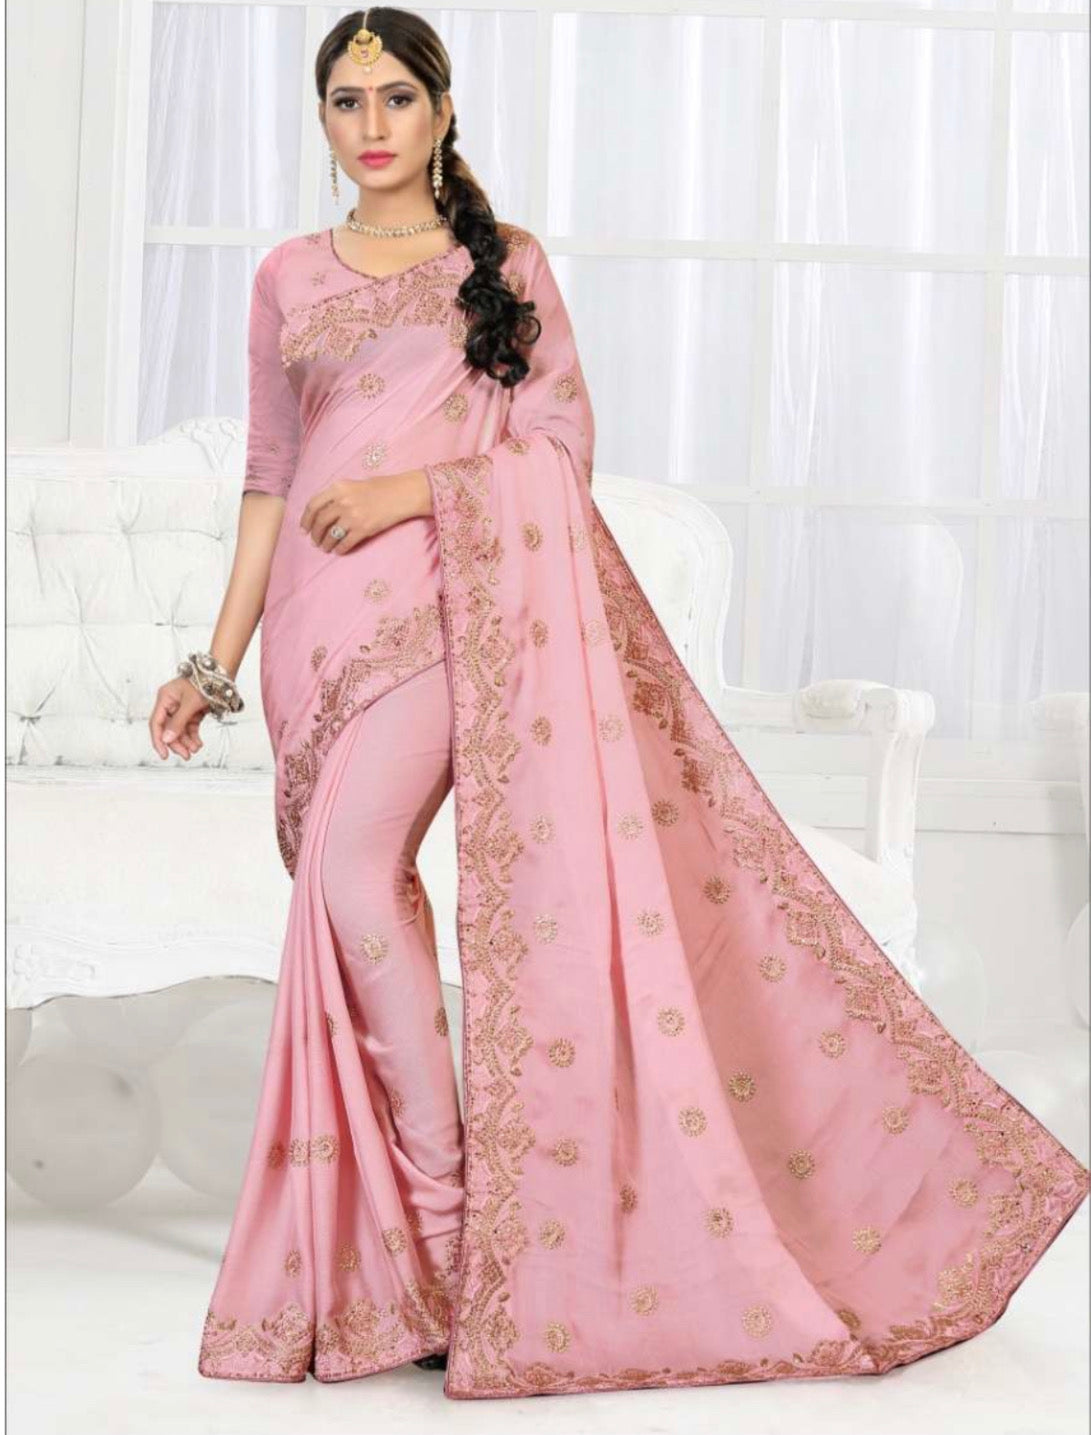 Affordable Glamour: Great Value Saree for Style on a Budget